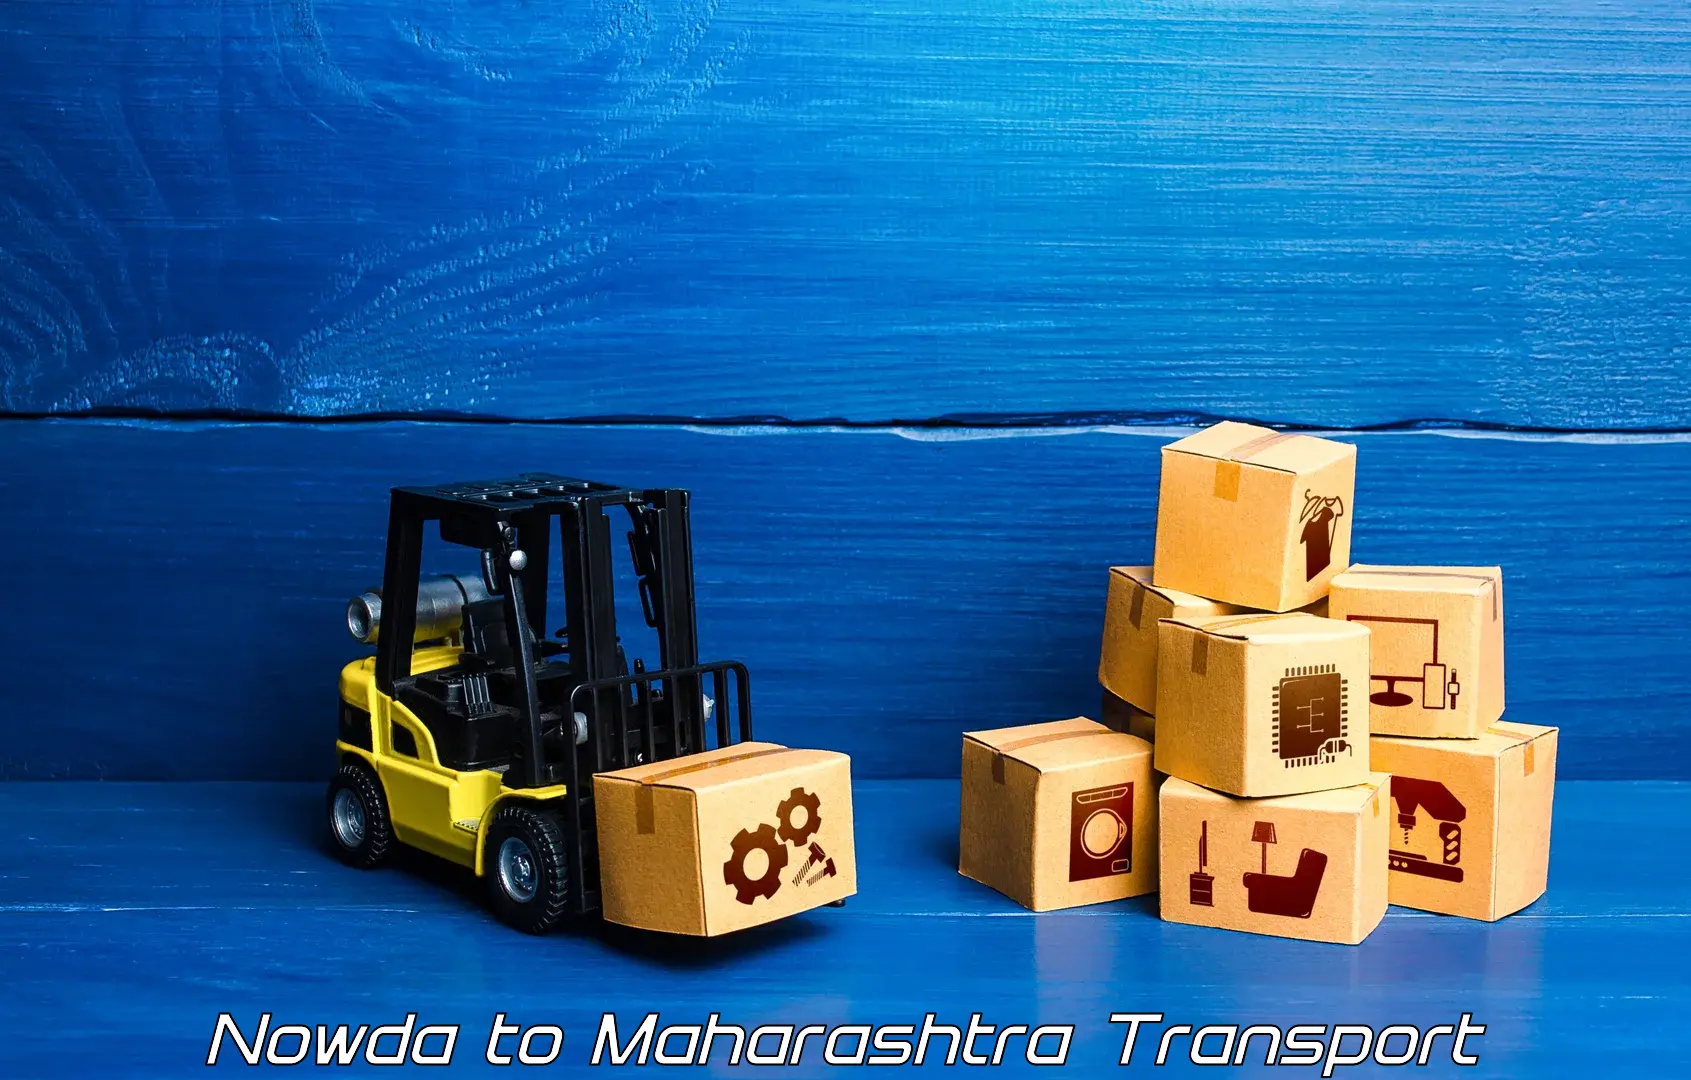 Cargo transport services Nowda to Dongarkinhi